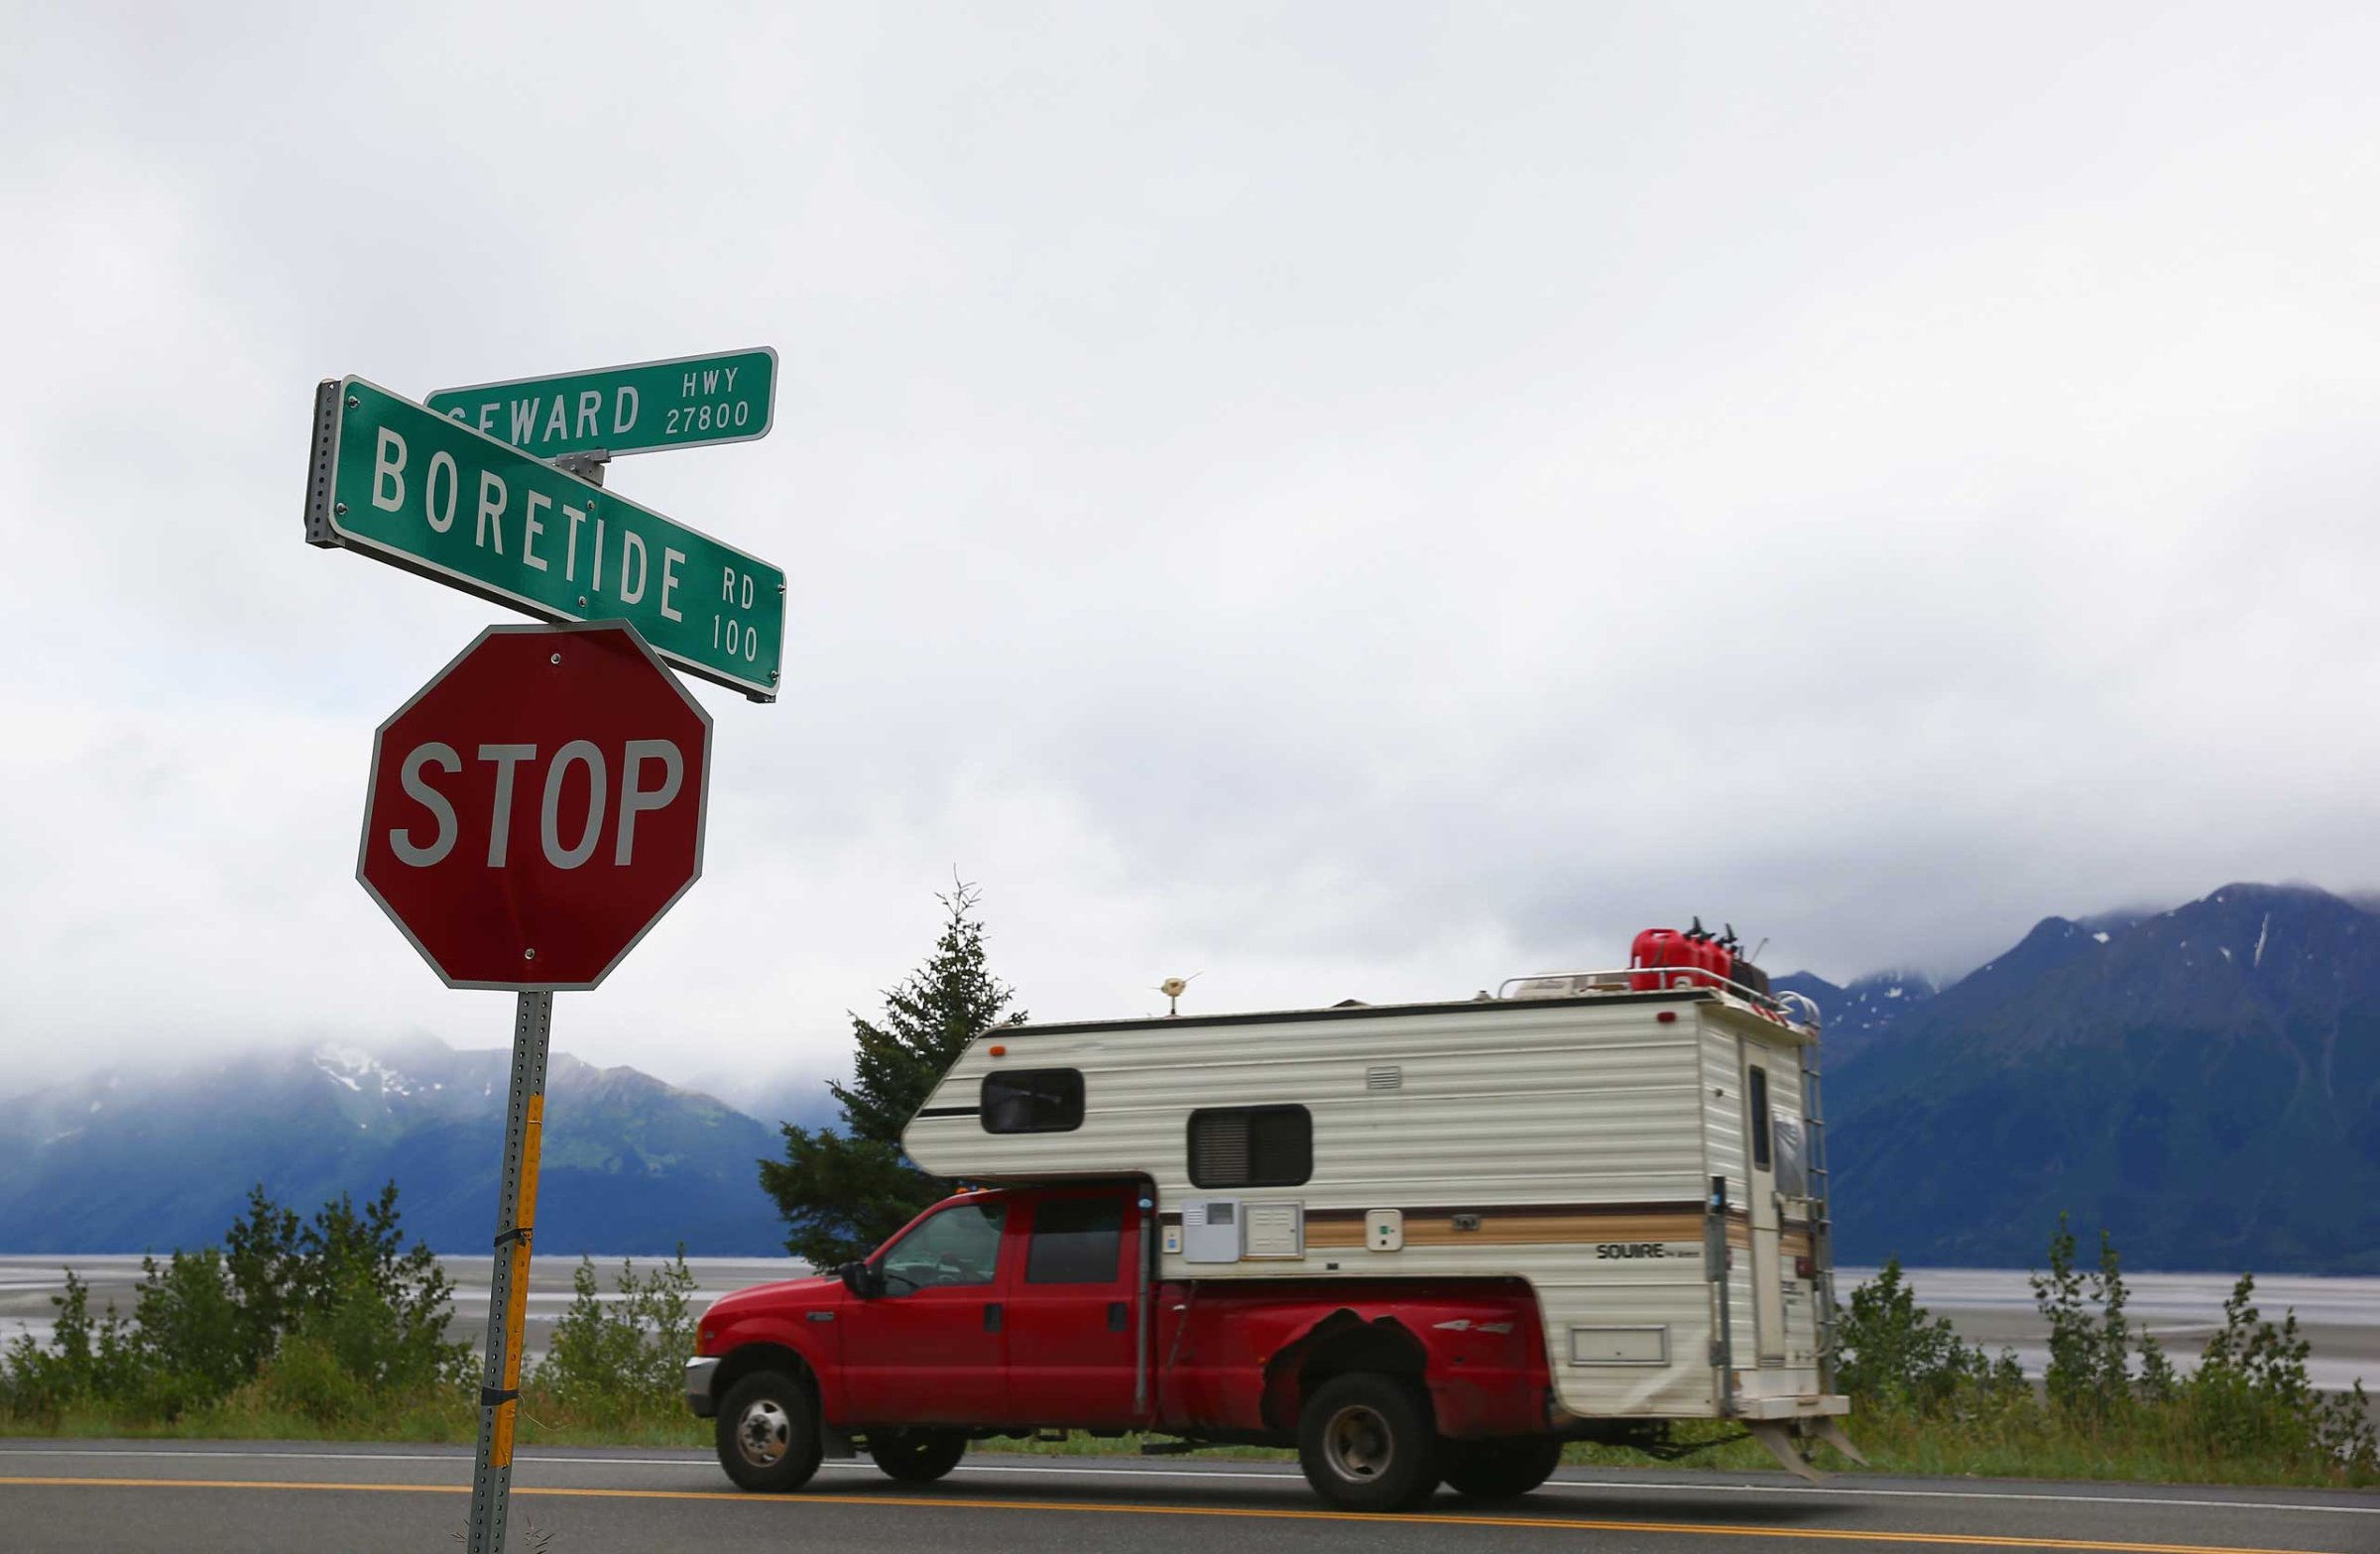 A truck passes a street sign named for the Bore Tide at Turnagain Arm in Anchorage, Alaska, in 2014.